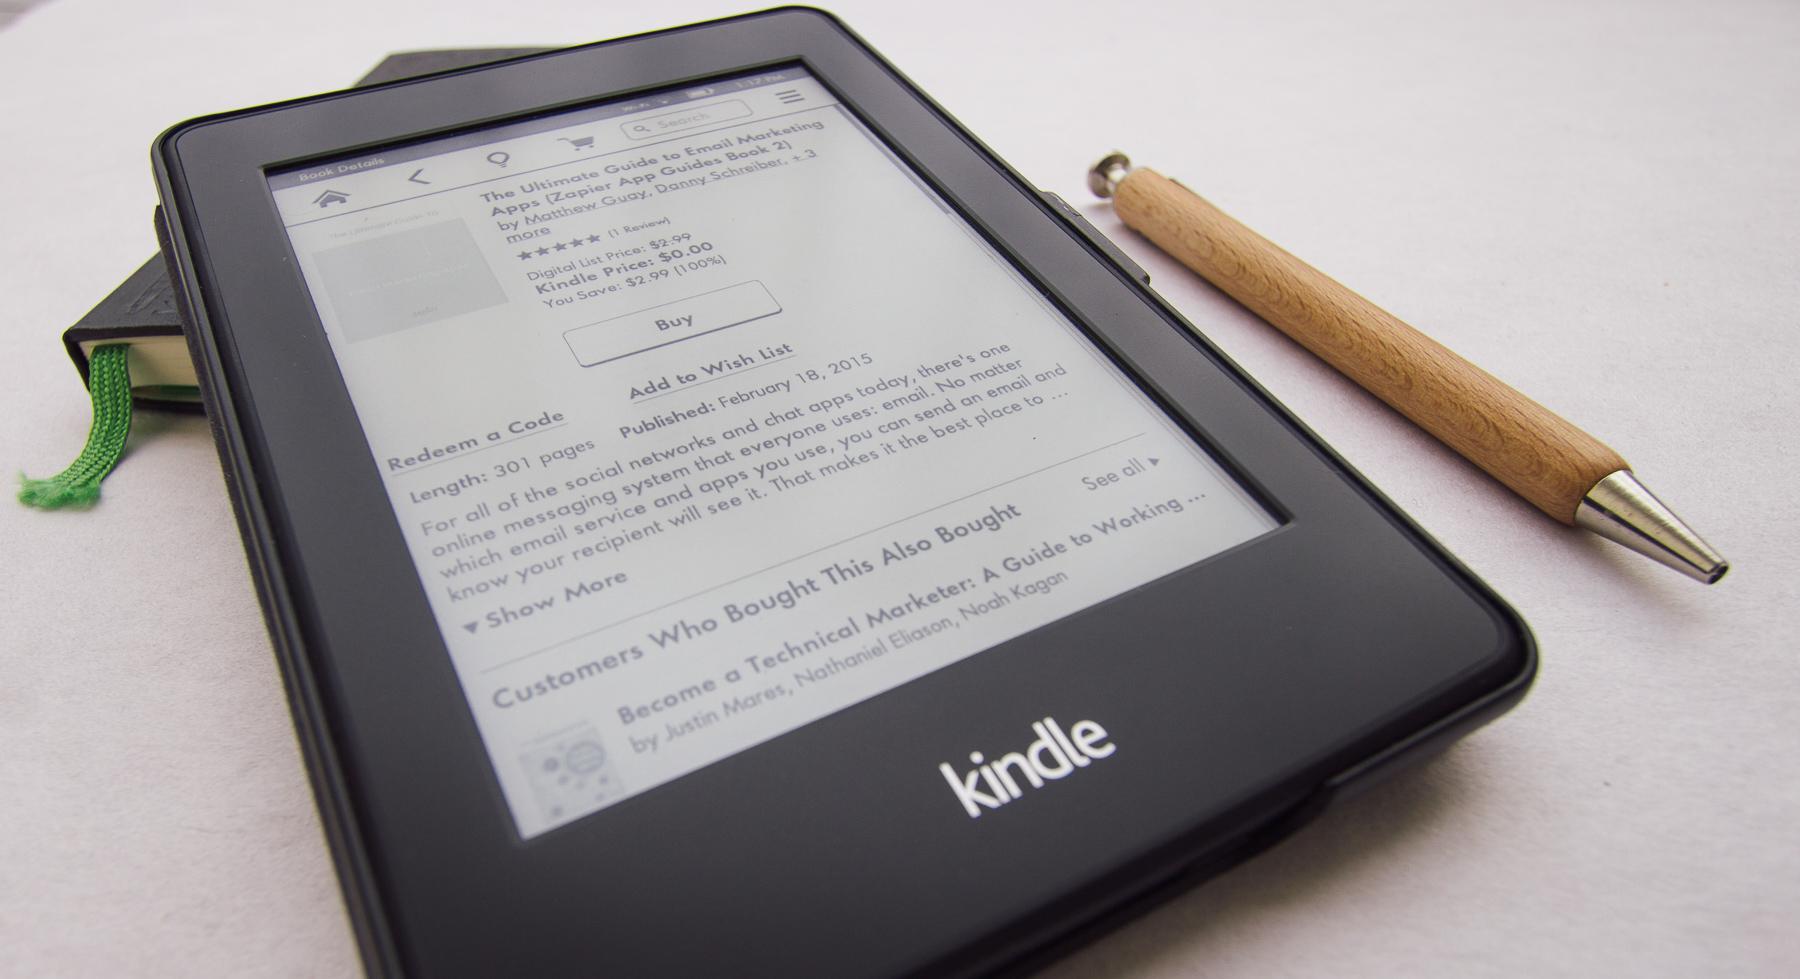 What Is  Kindle eBook? How to get more reviews on  Kindle eBook?